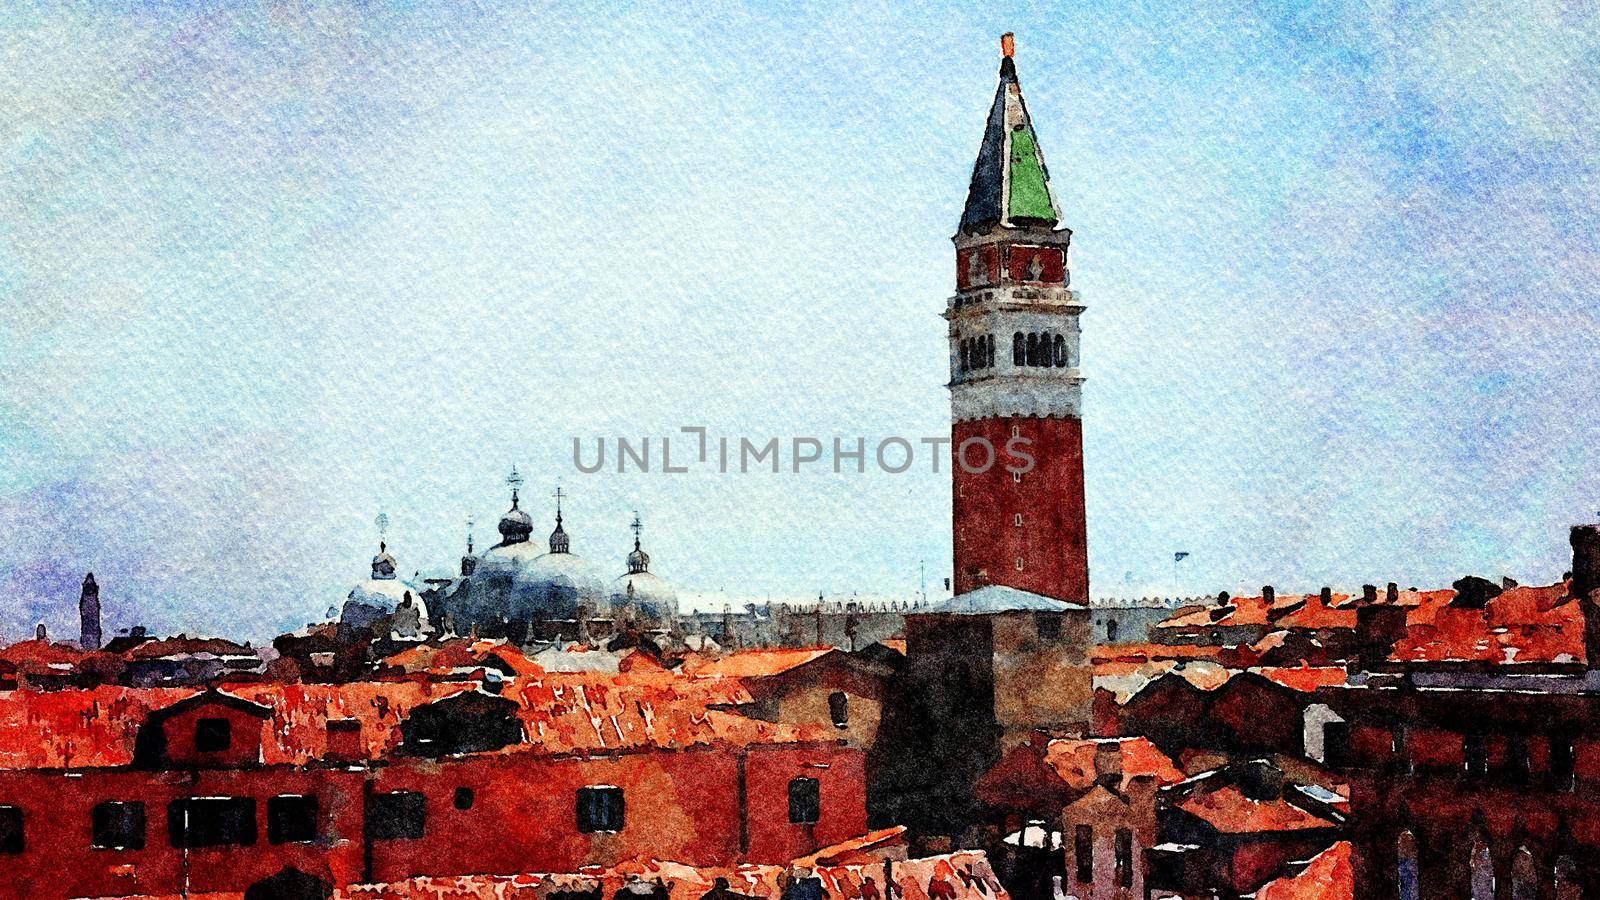 Watercolor representing a view of the tower and roofs of the cathedral of Venice from the balcony of a historic building in the historic center